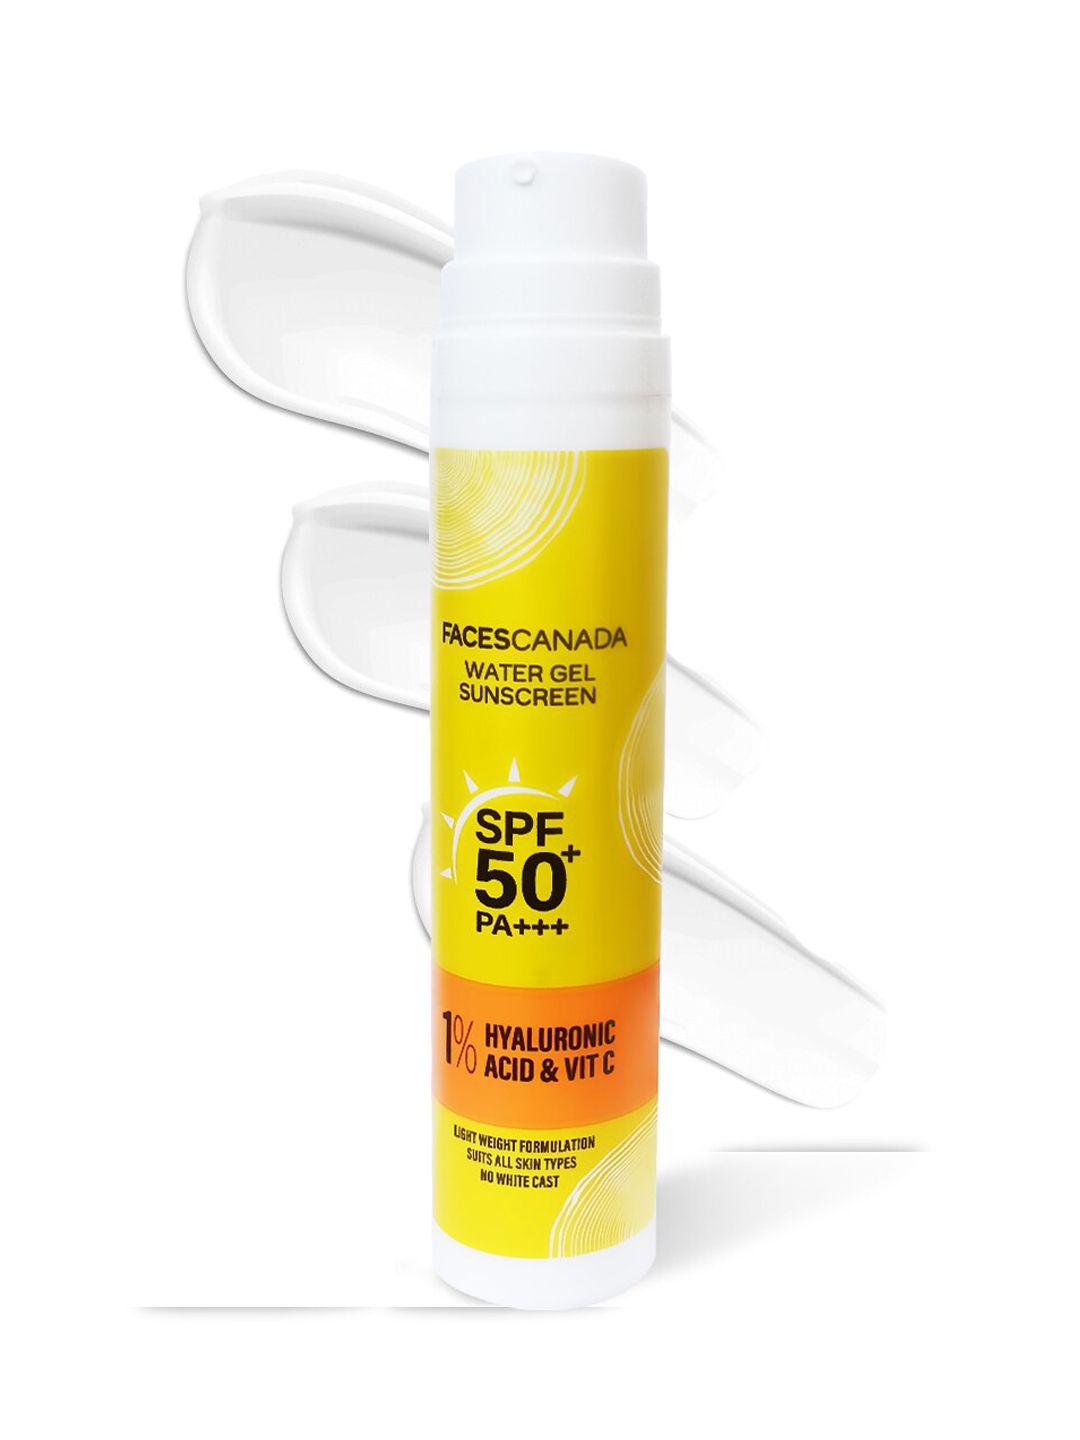 faces canada water gel sunscreen spf50 pa+++ with 1% hyaluronic acid & vitamin c - 50g